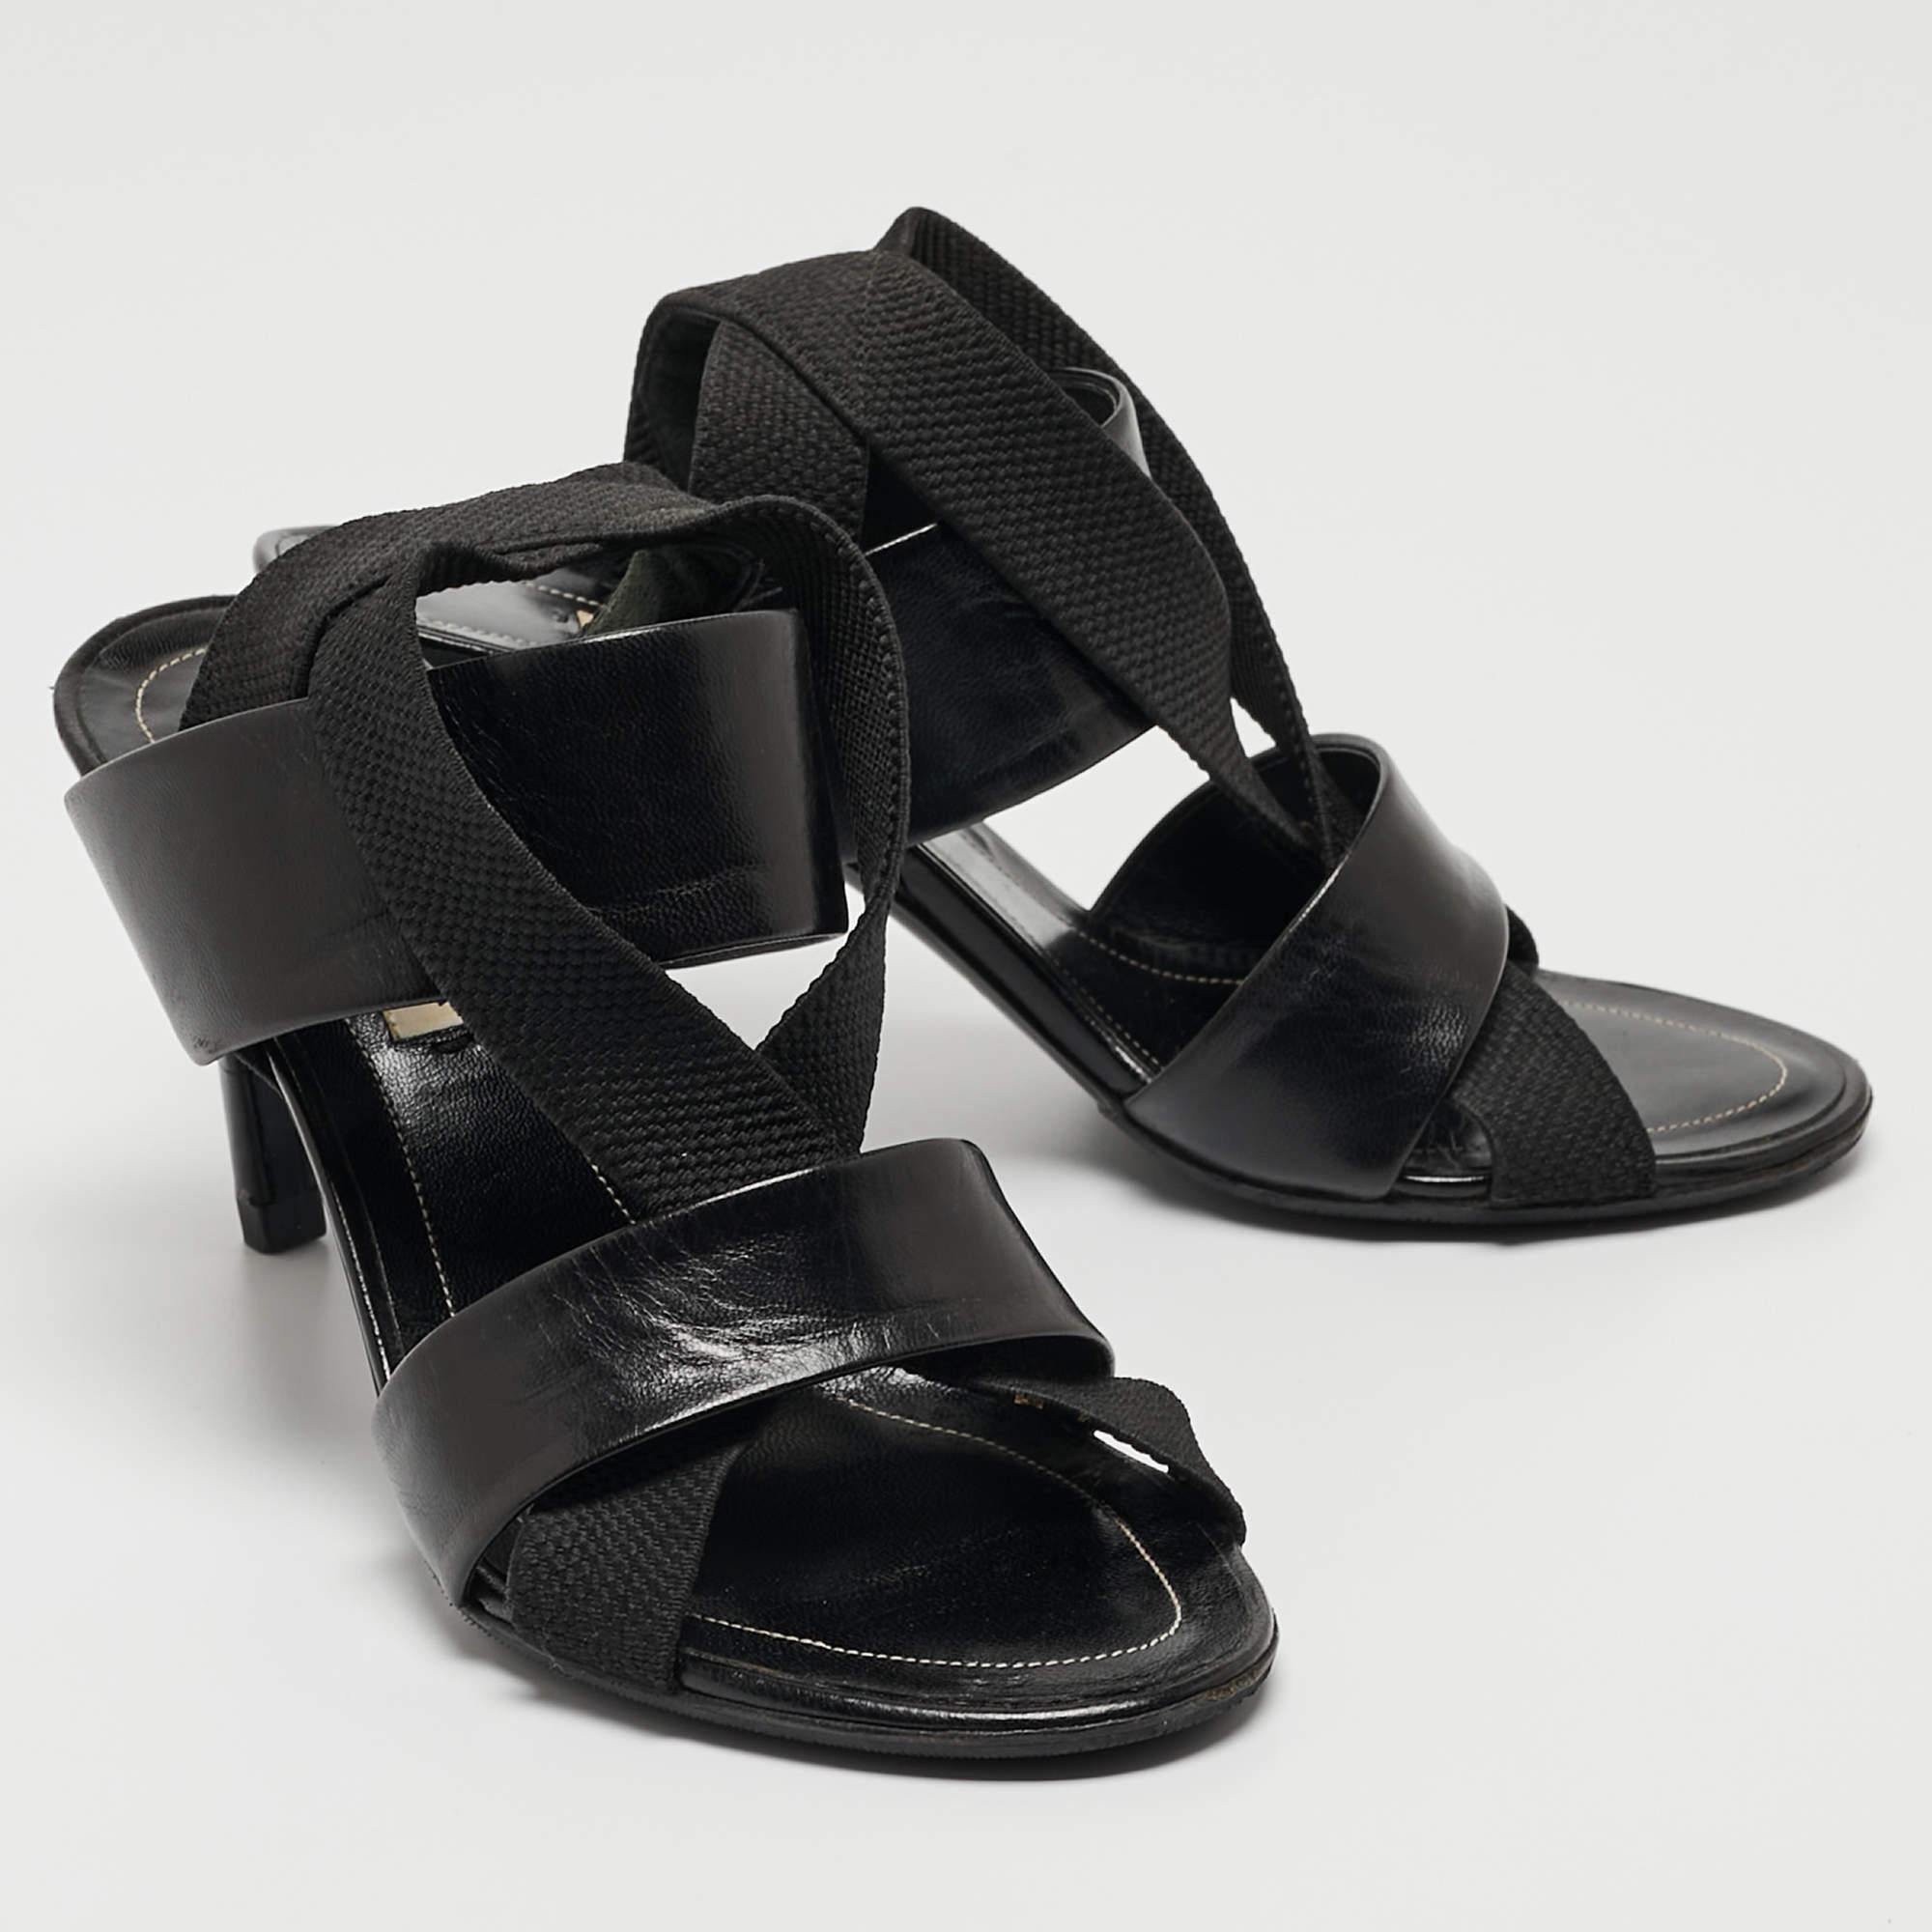 Balenciaga Black Leather and Elastic Strappy Slingback Sandals Size 36 For Sale 3